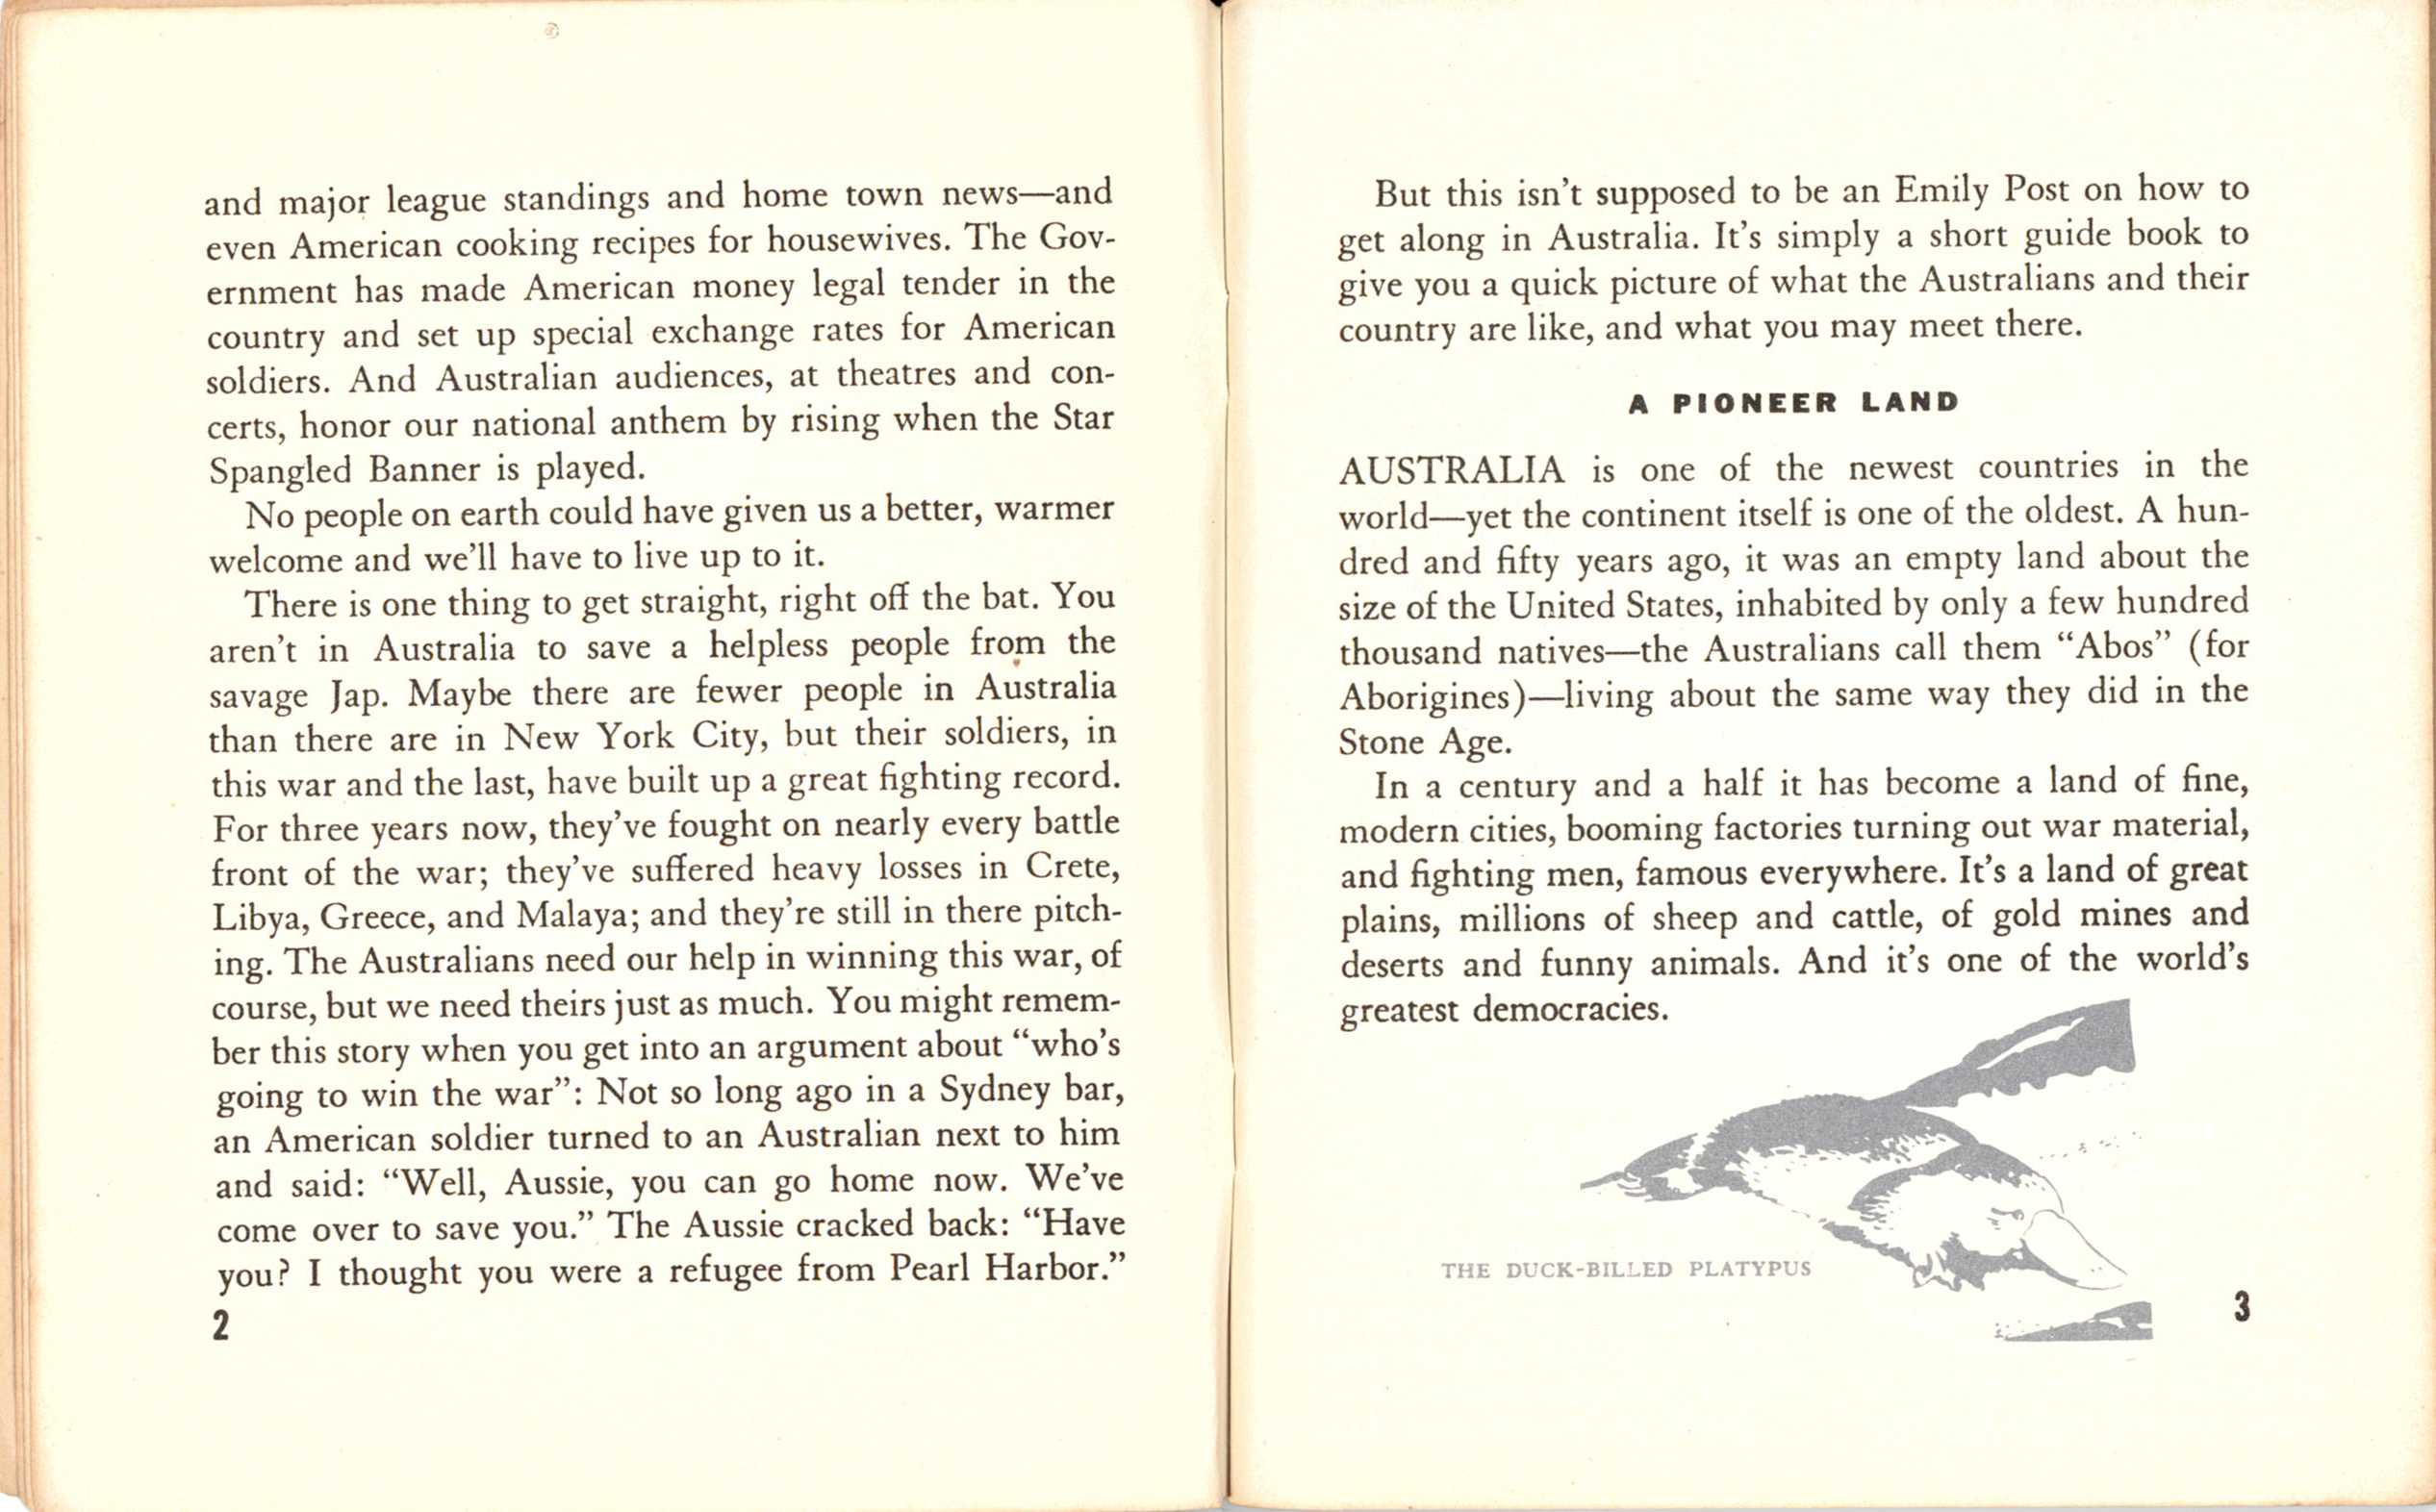 Pocket Guide to Australia page 3